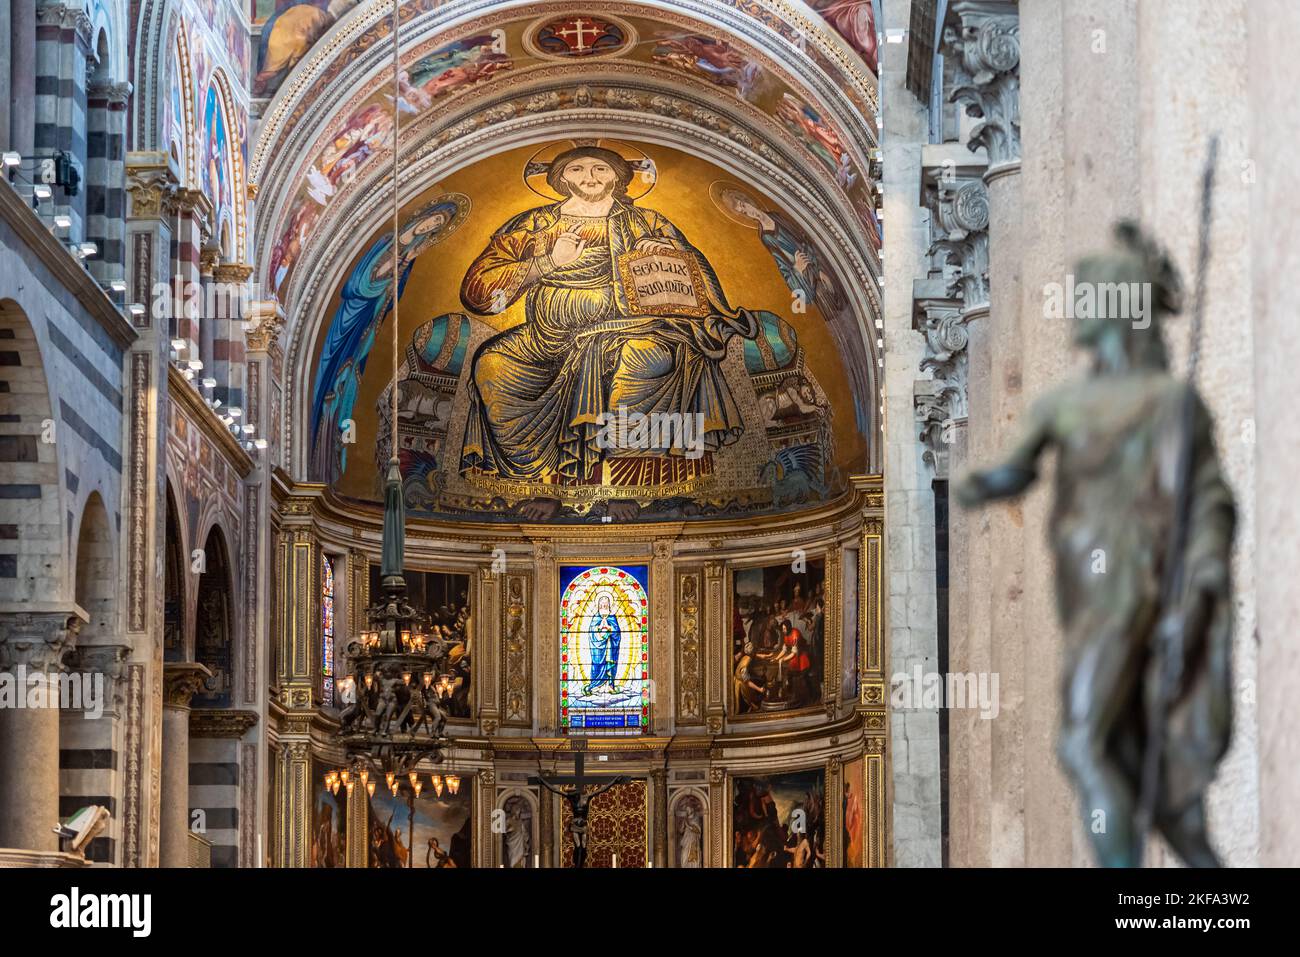 View of huge golden fresco of Jesus decorating the dome ceiling inside catholic Basilica in Pisa Stock Photo